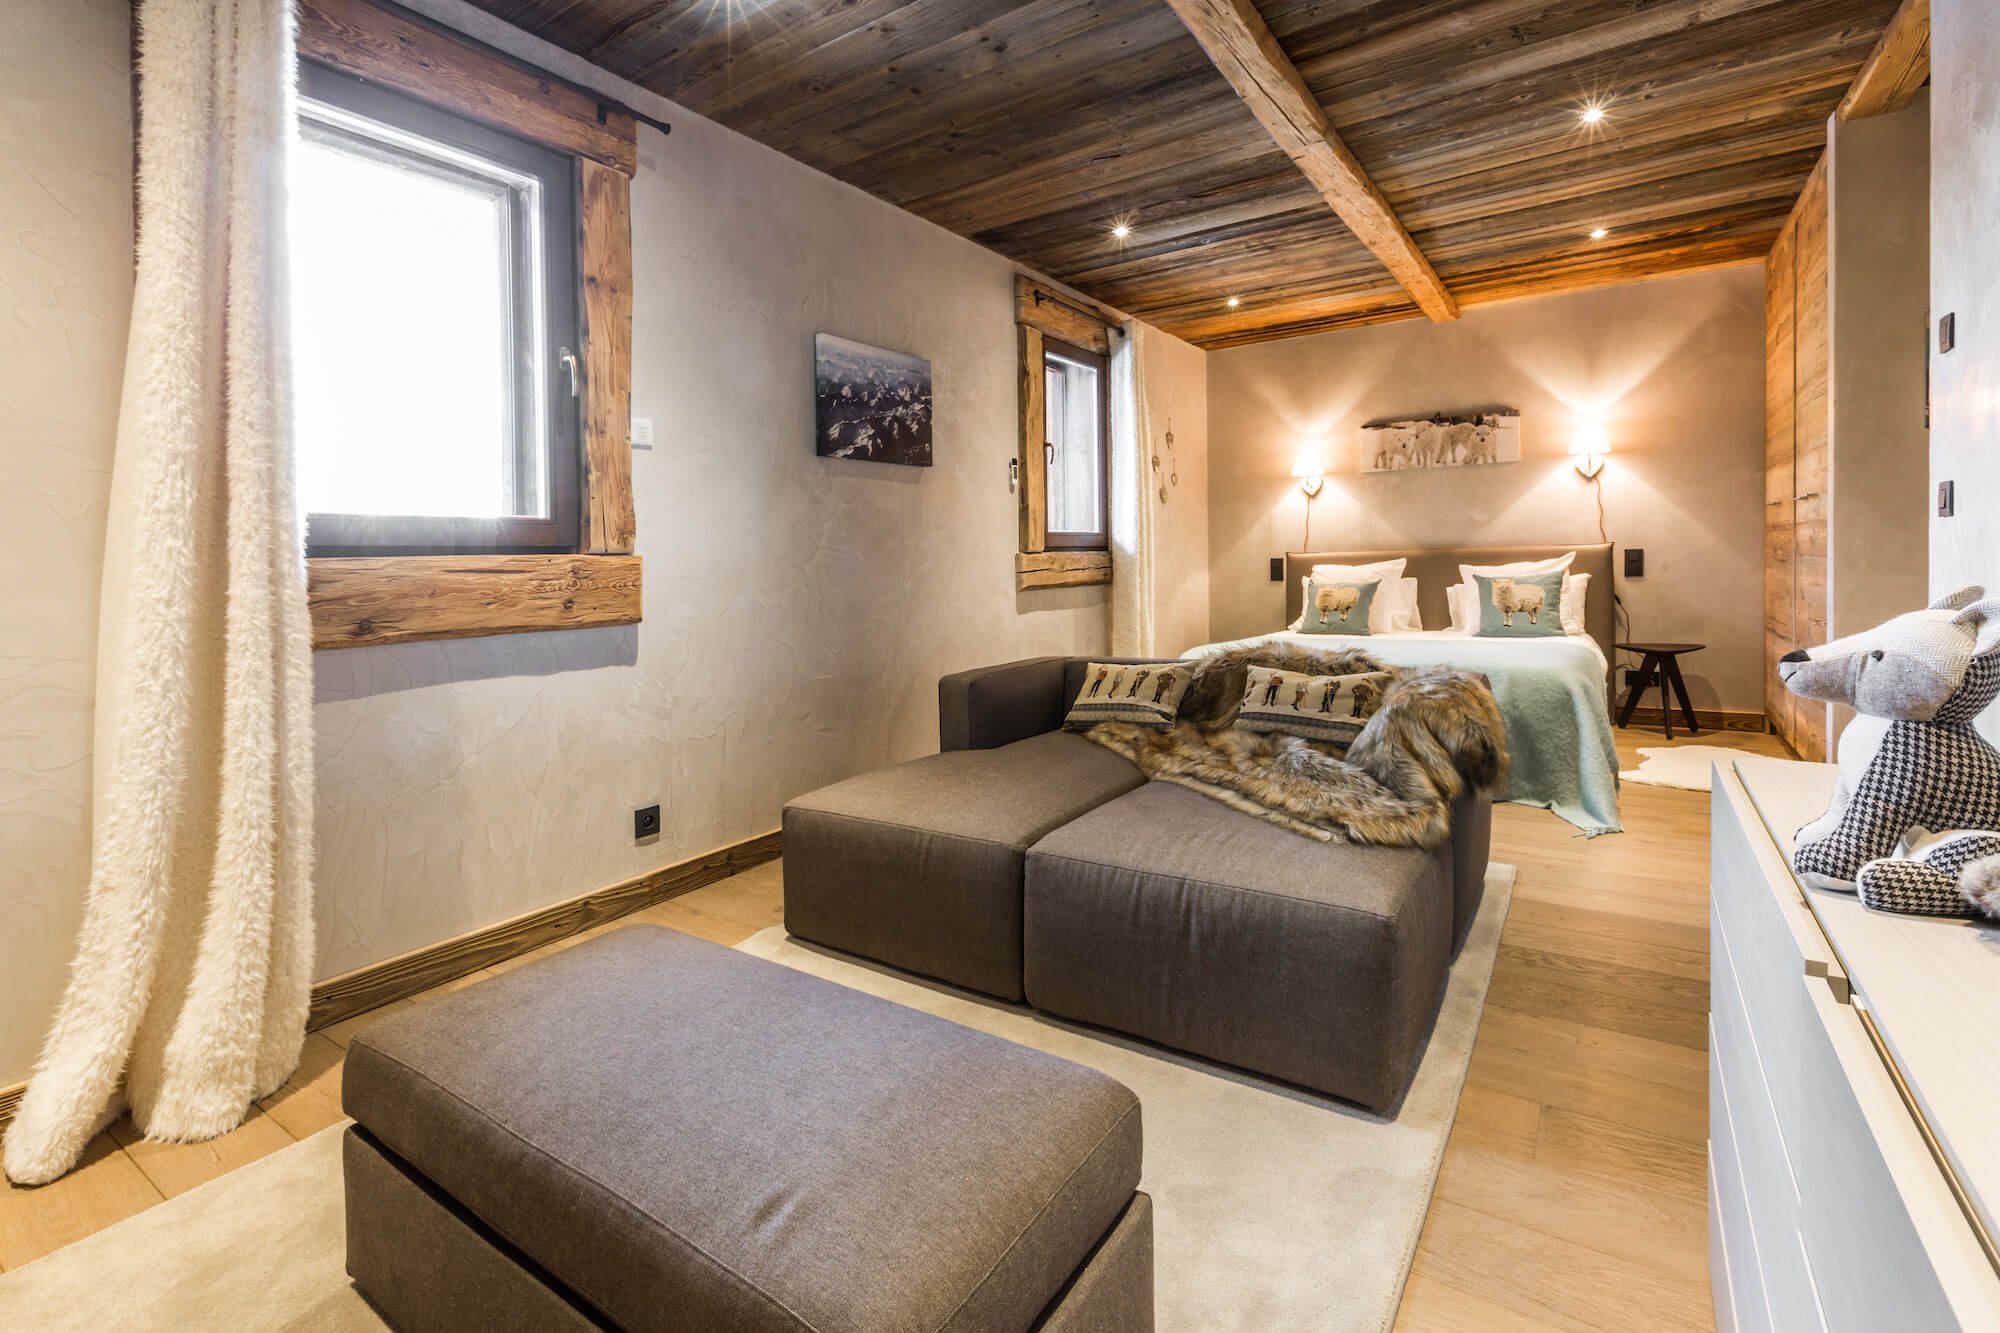 Exceptional property in Saint-Gervais for your seminar near Megève ski in / ski out